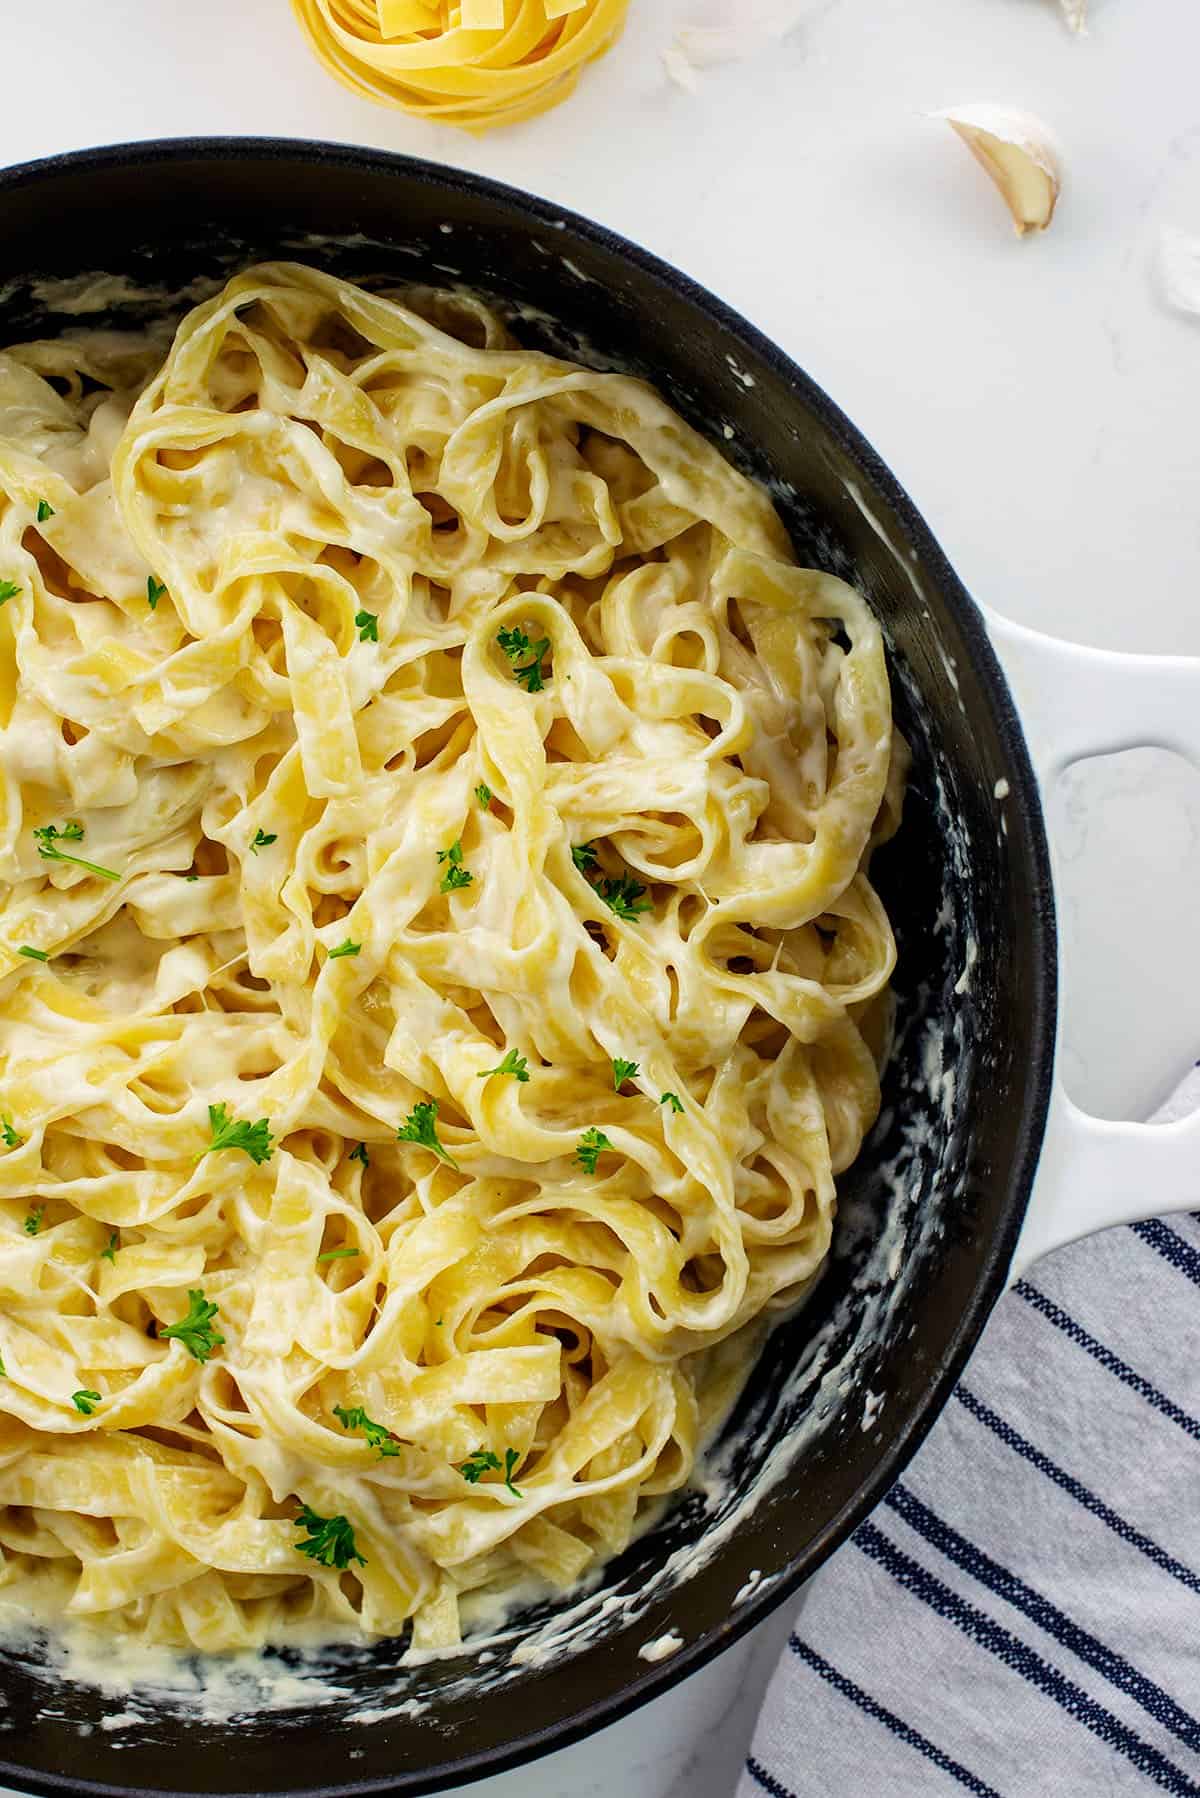 What Happens If You Eat Bad Alfredo Sauce? 